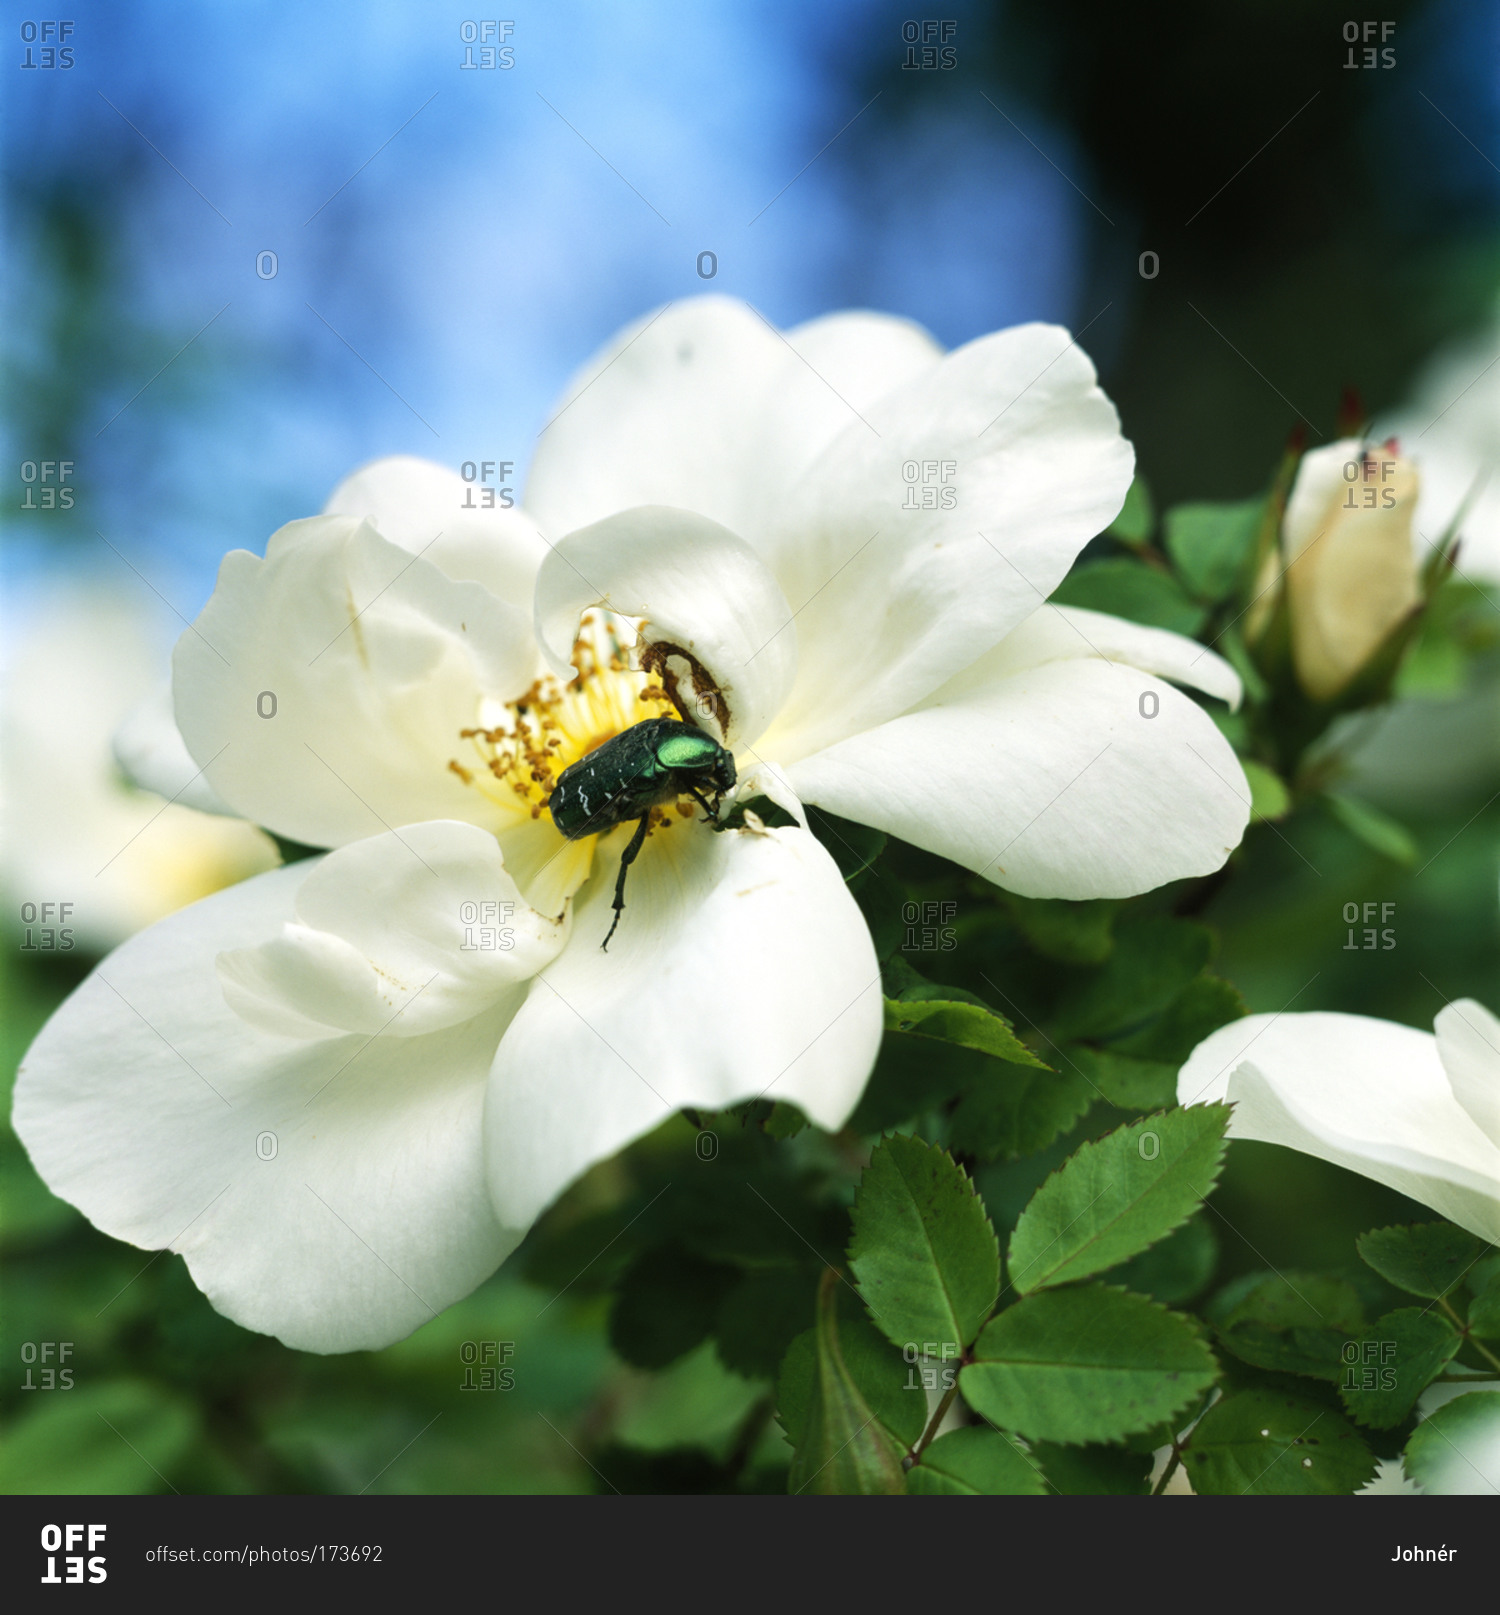 A rose chafer on a flower